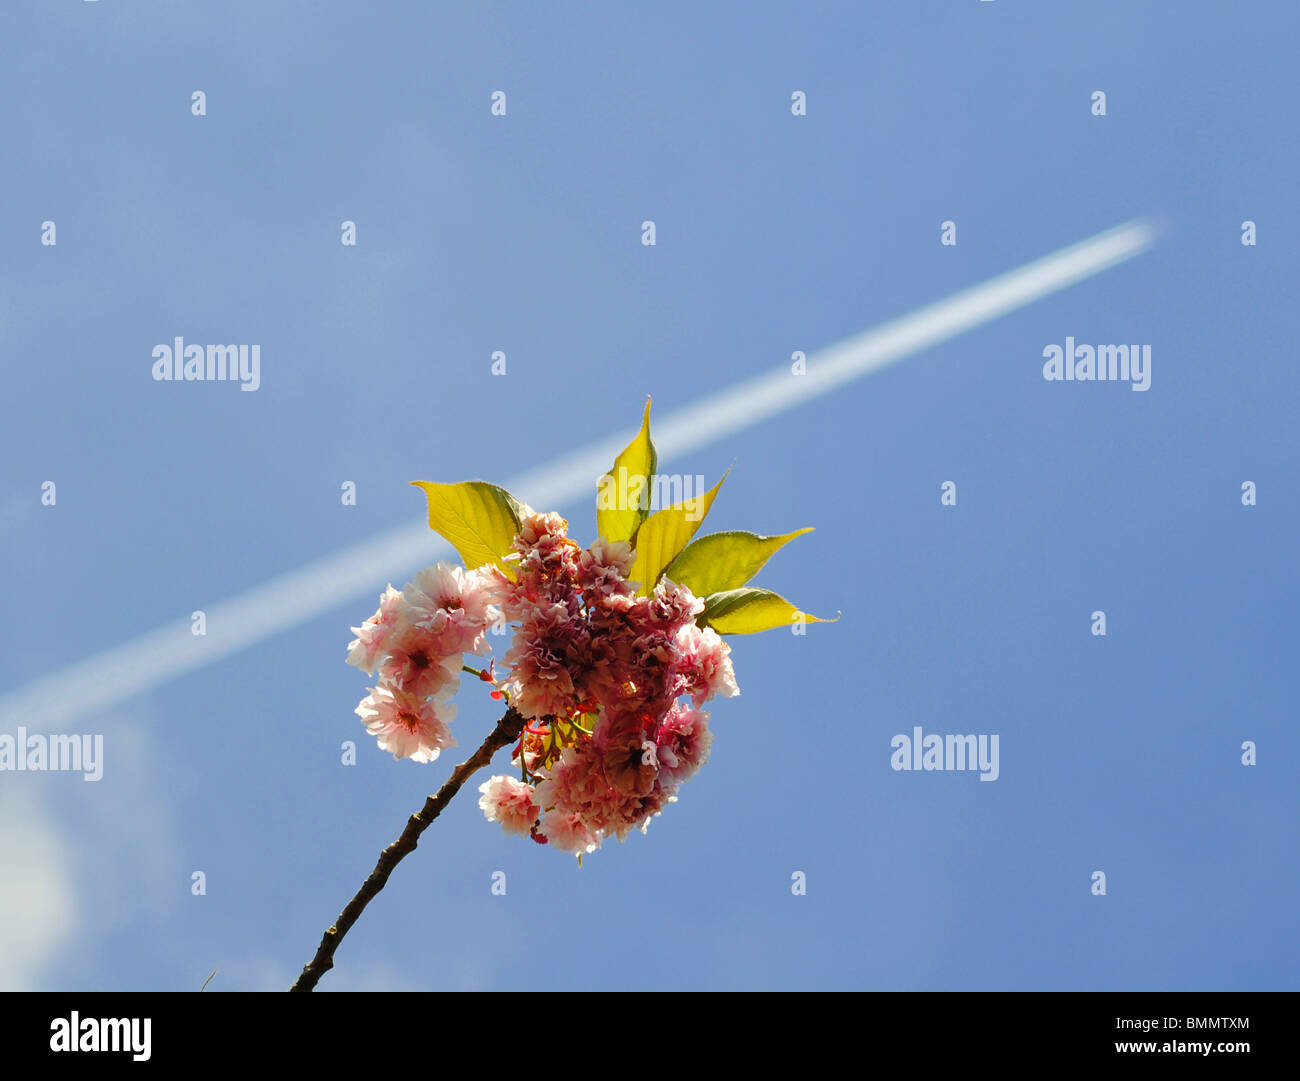 Vapor trail and pink apple blossom in Dorset, England Stock Photo